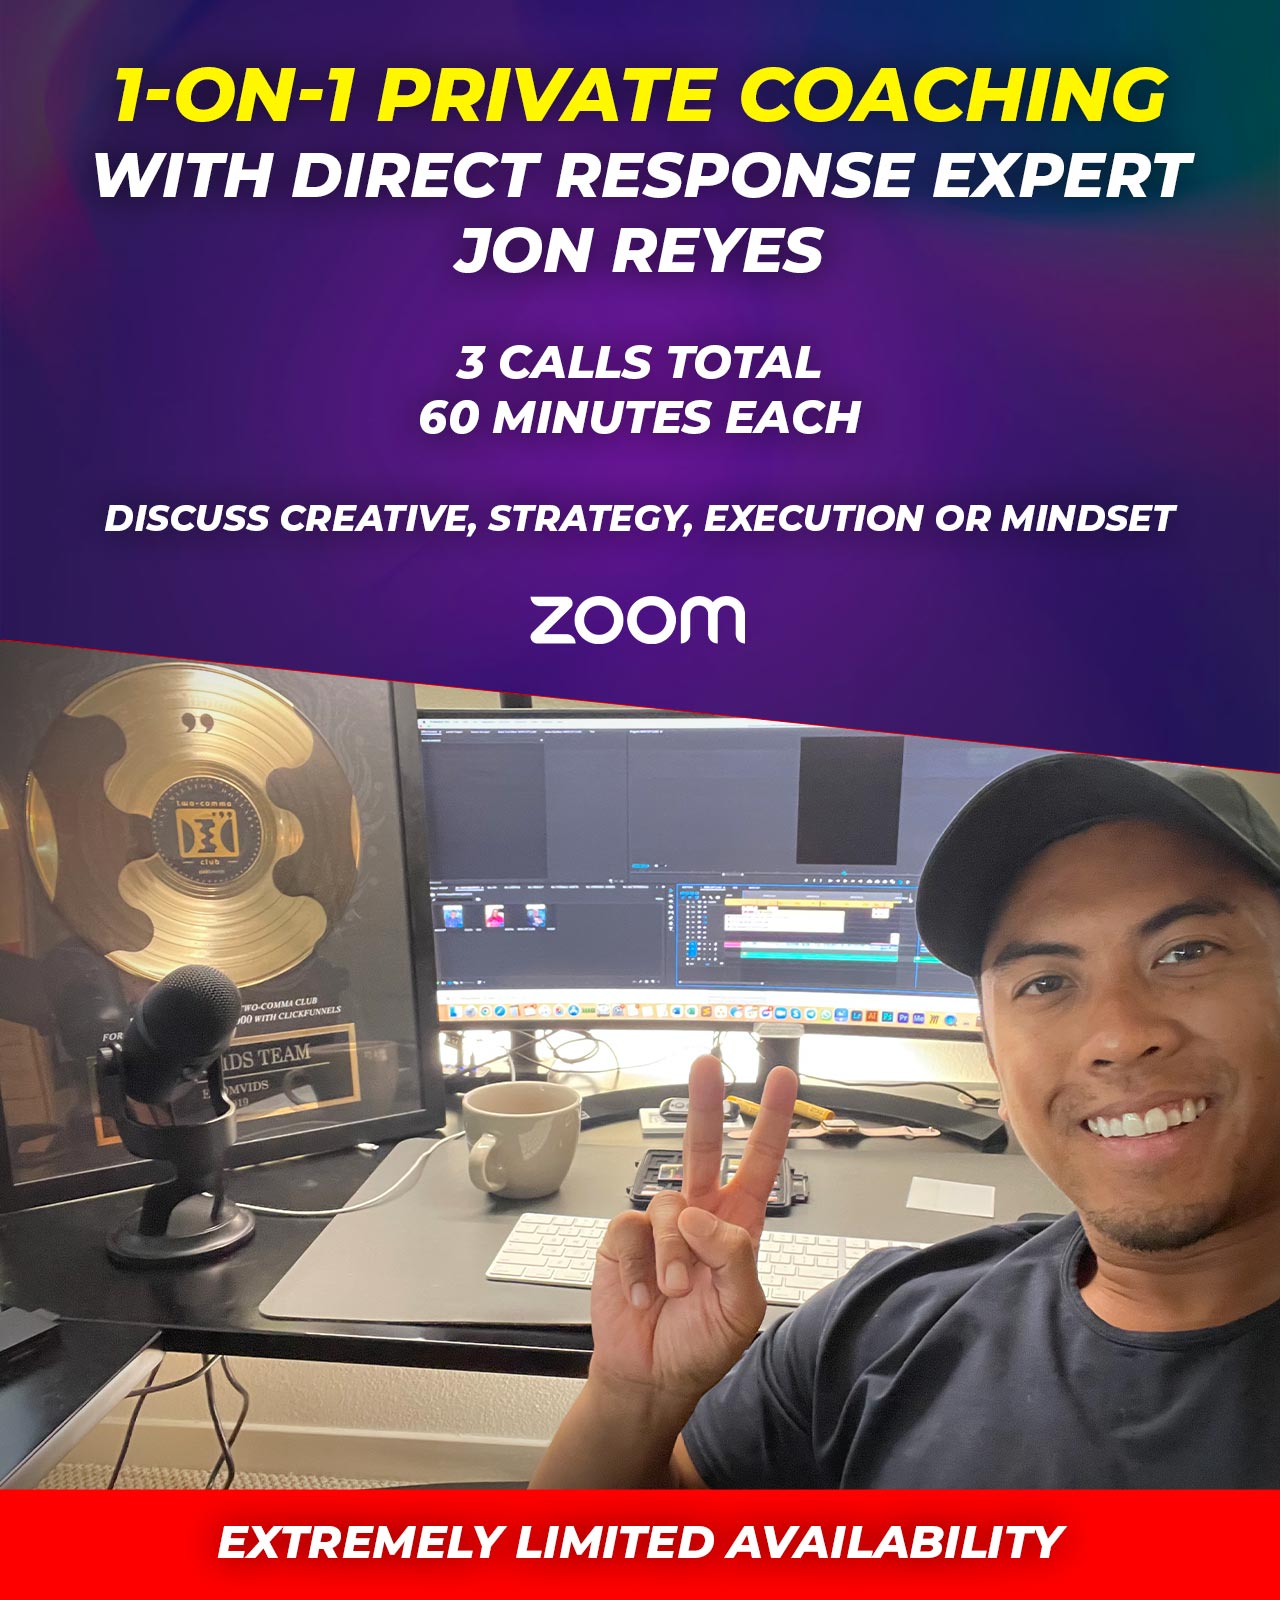 Private 1-on-1 Coaching Call with Jon Reyes